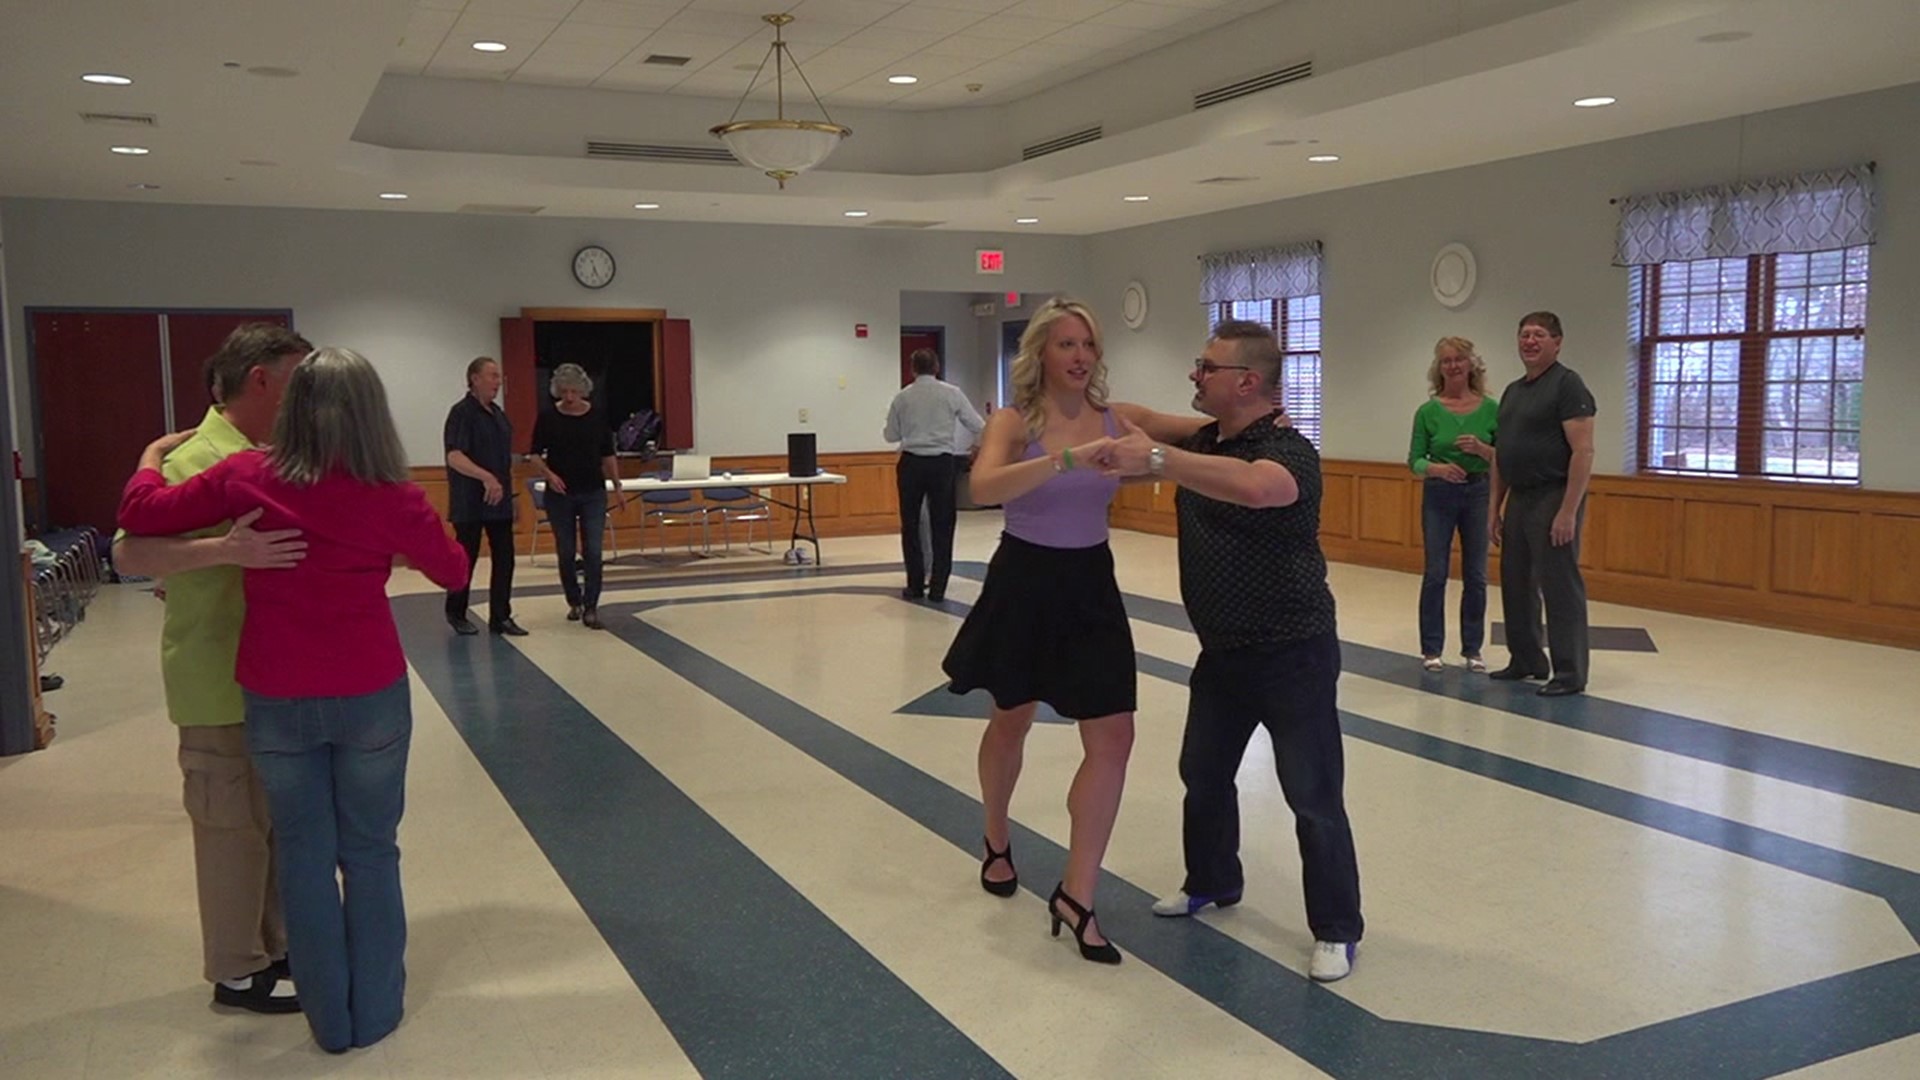 This week, Newswatch 16's Chelsea Strub checks out an opportunity to learn some new dance moves in Lackawanna County.